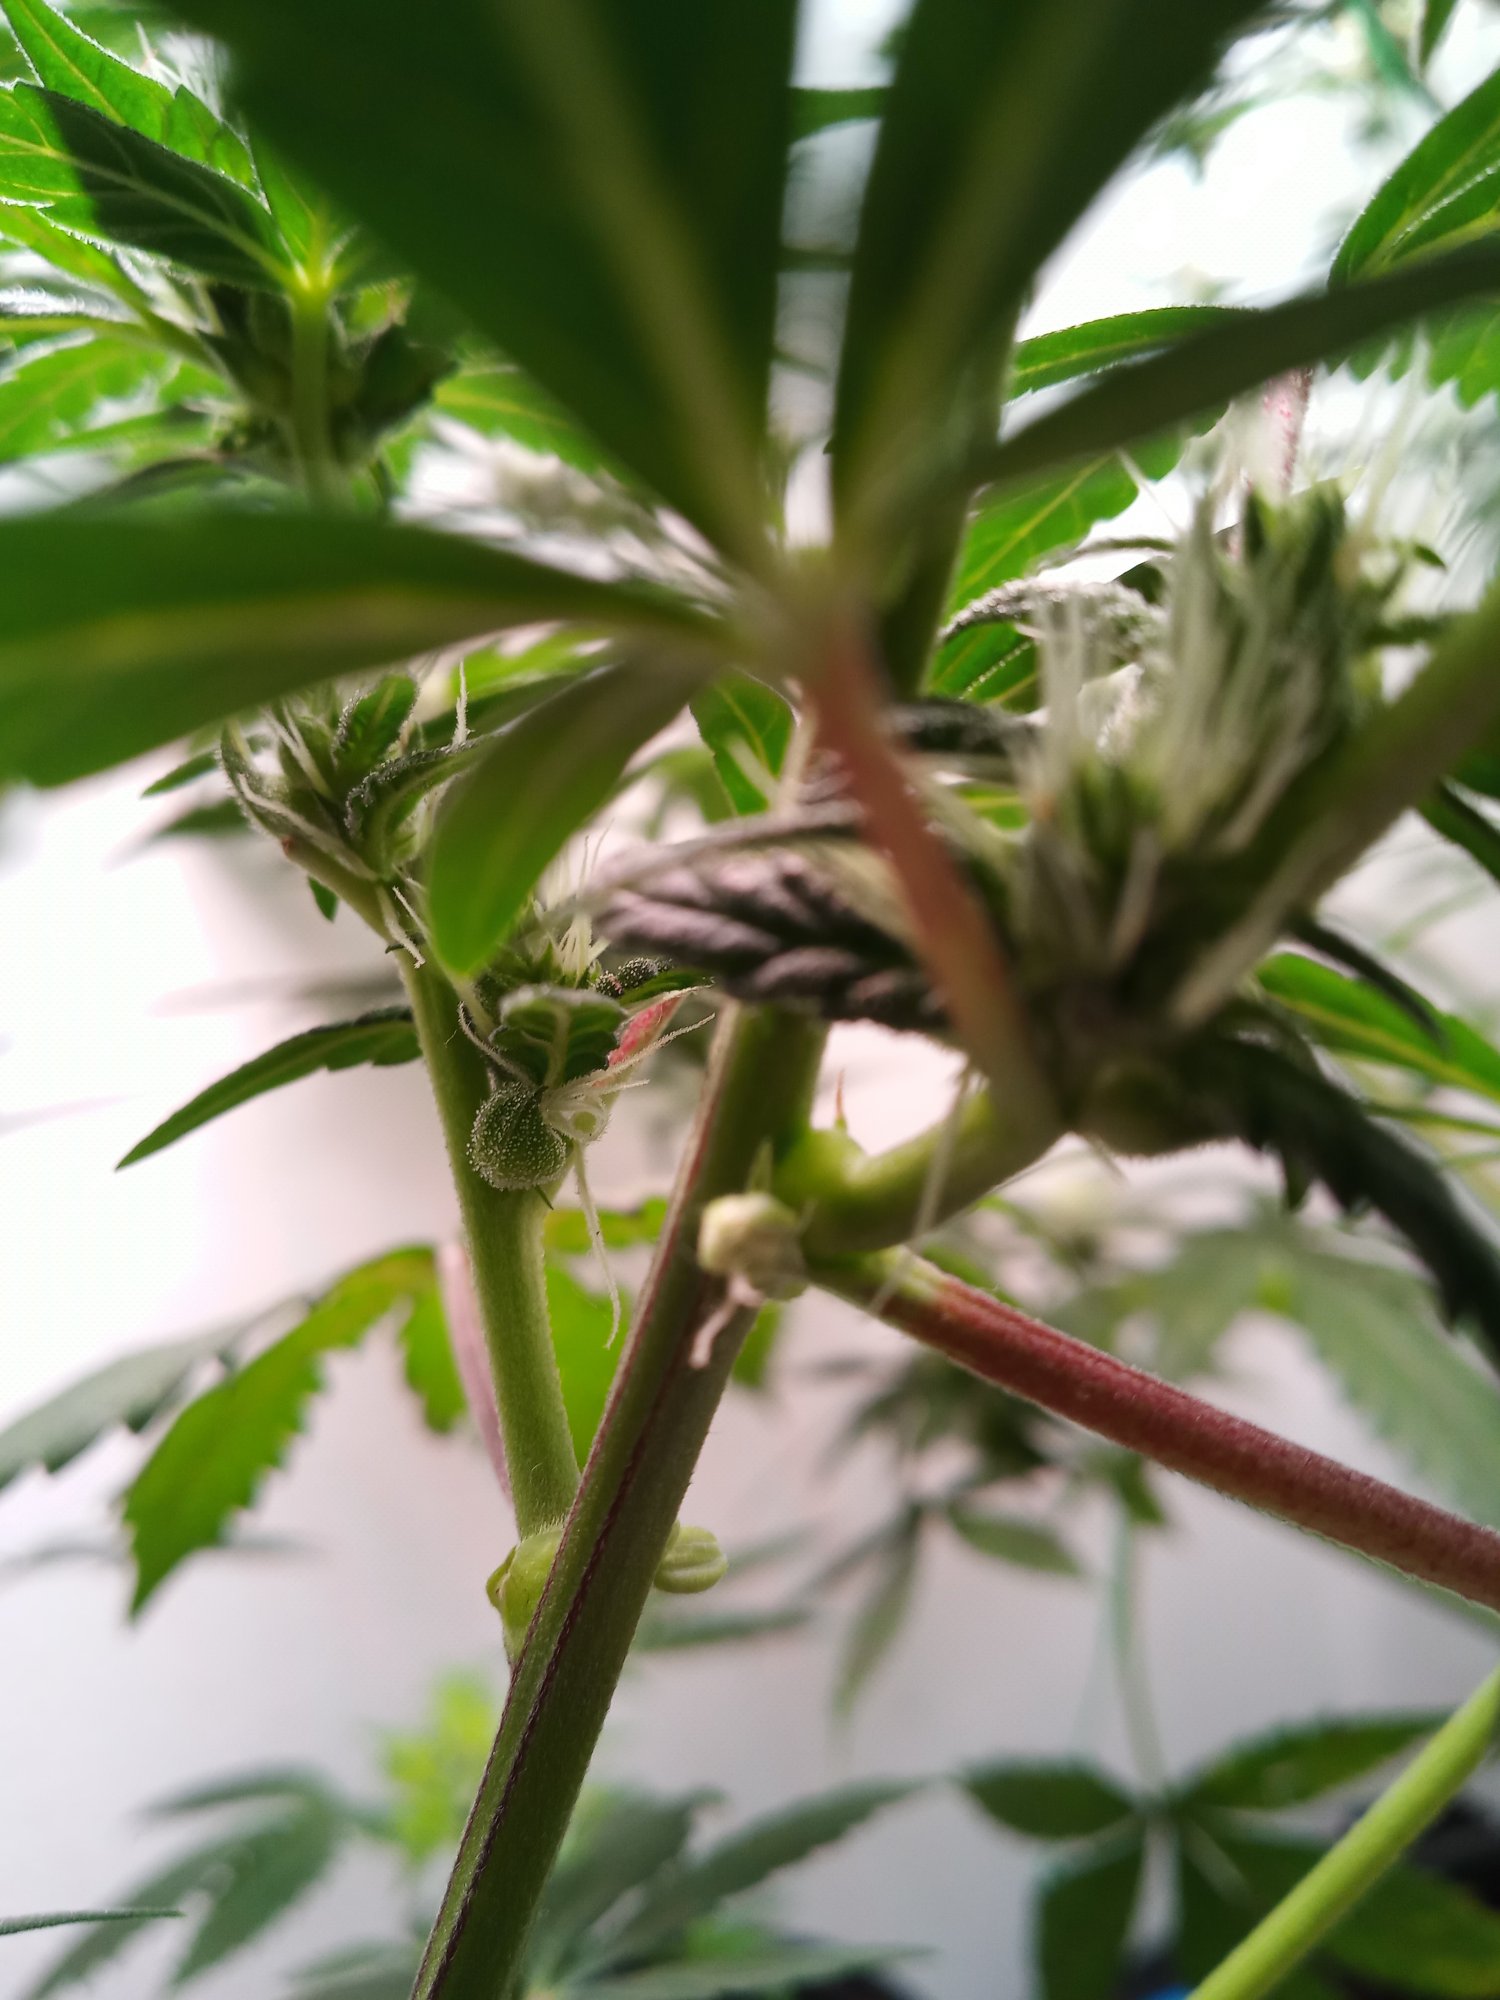 Weird structures on my plant in flower 12